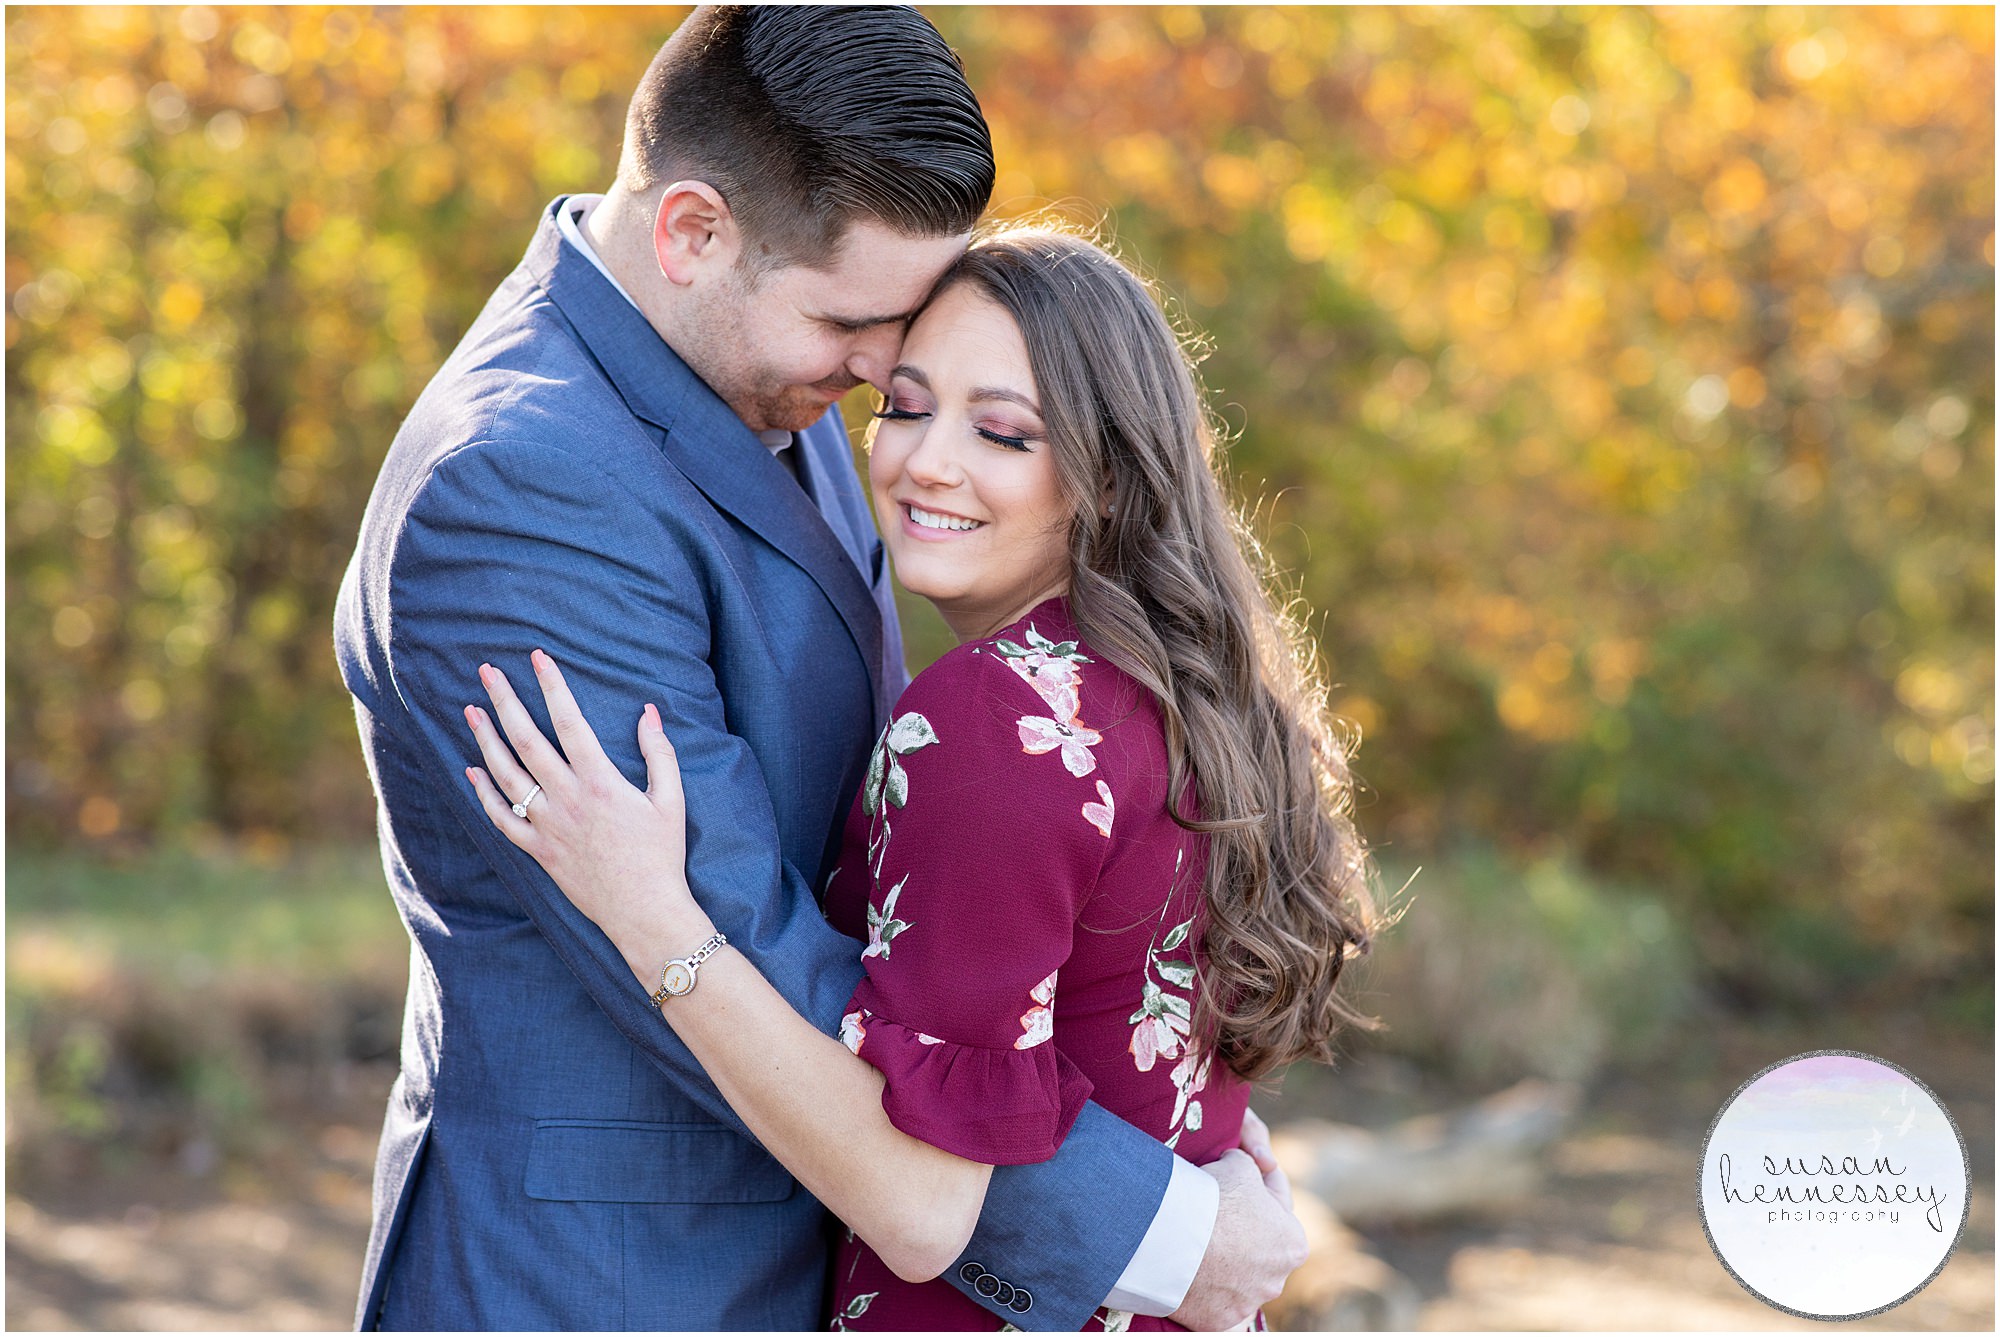 Peace Valley Park Engagement Session in the Fall